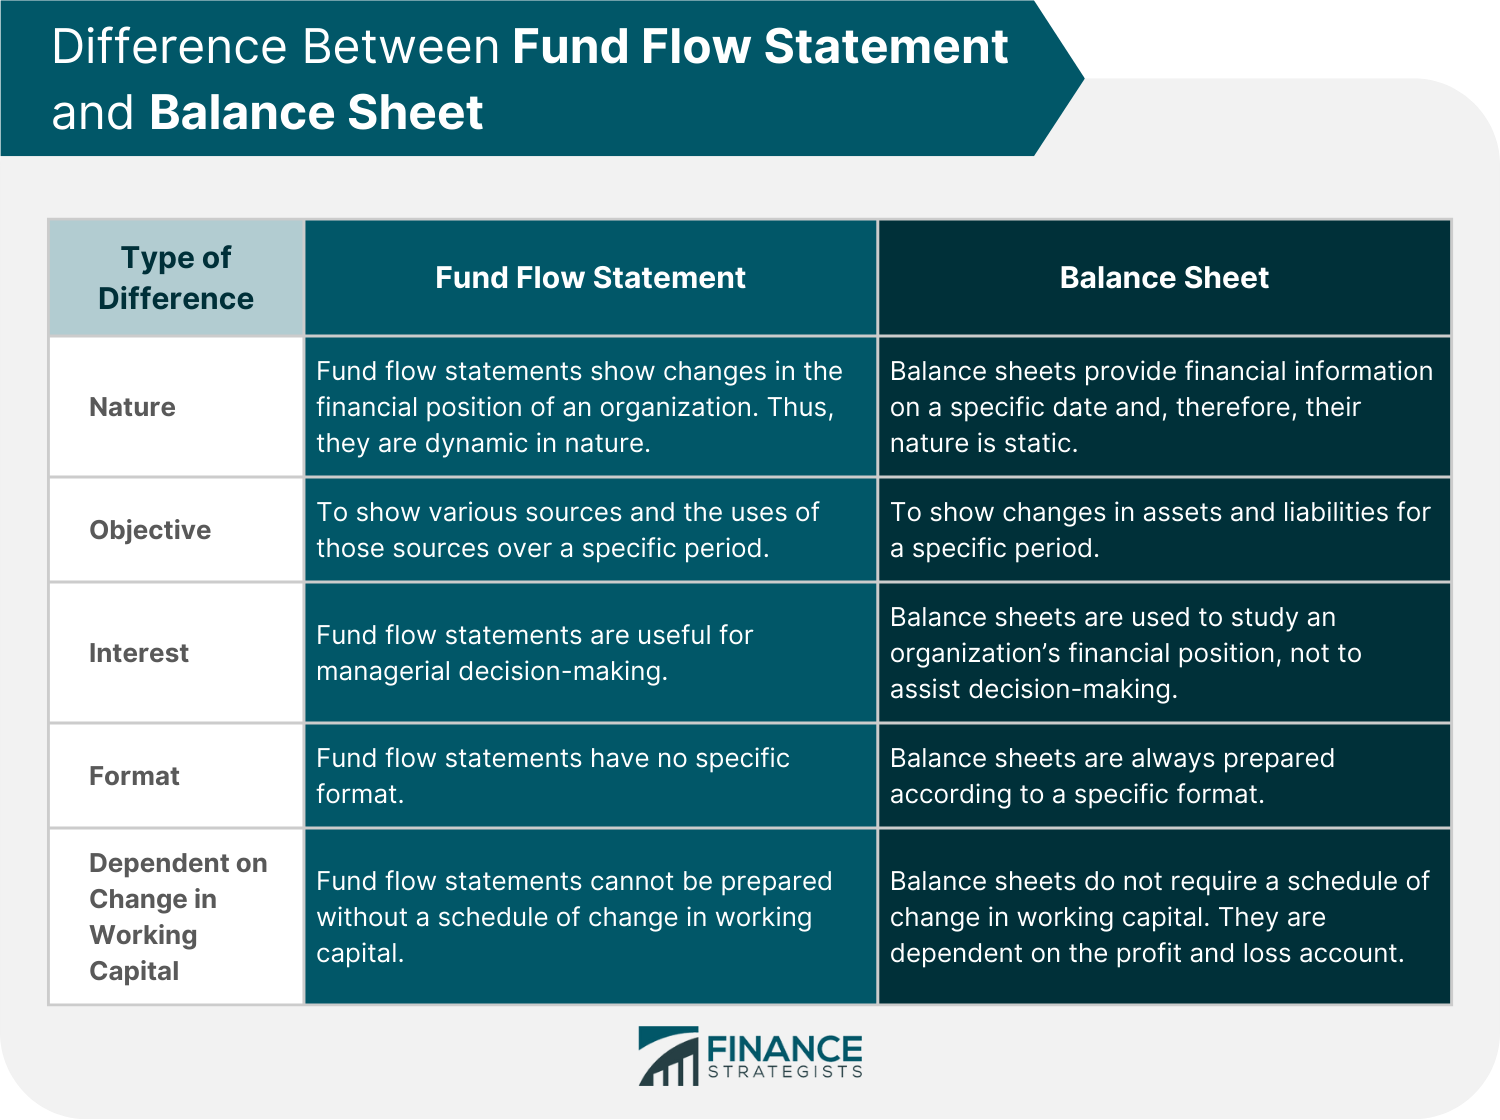 Difference Between Fund Flow Statement and Balance Sheet (LEFT)